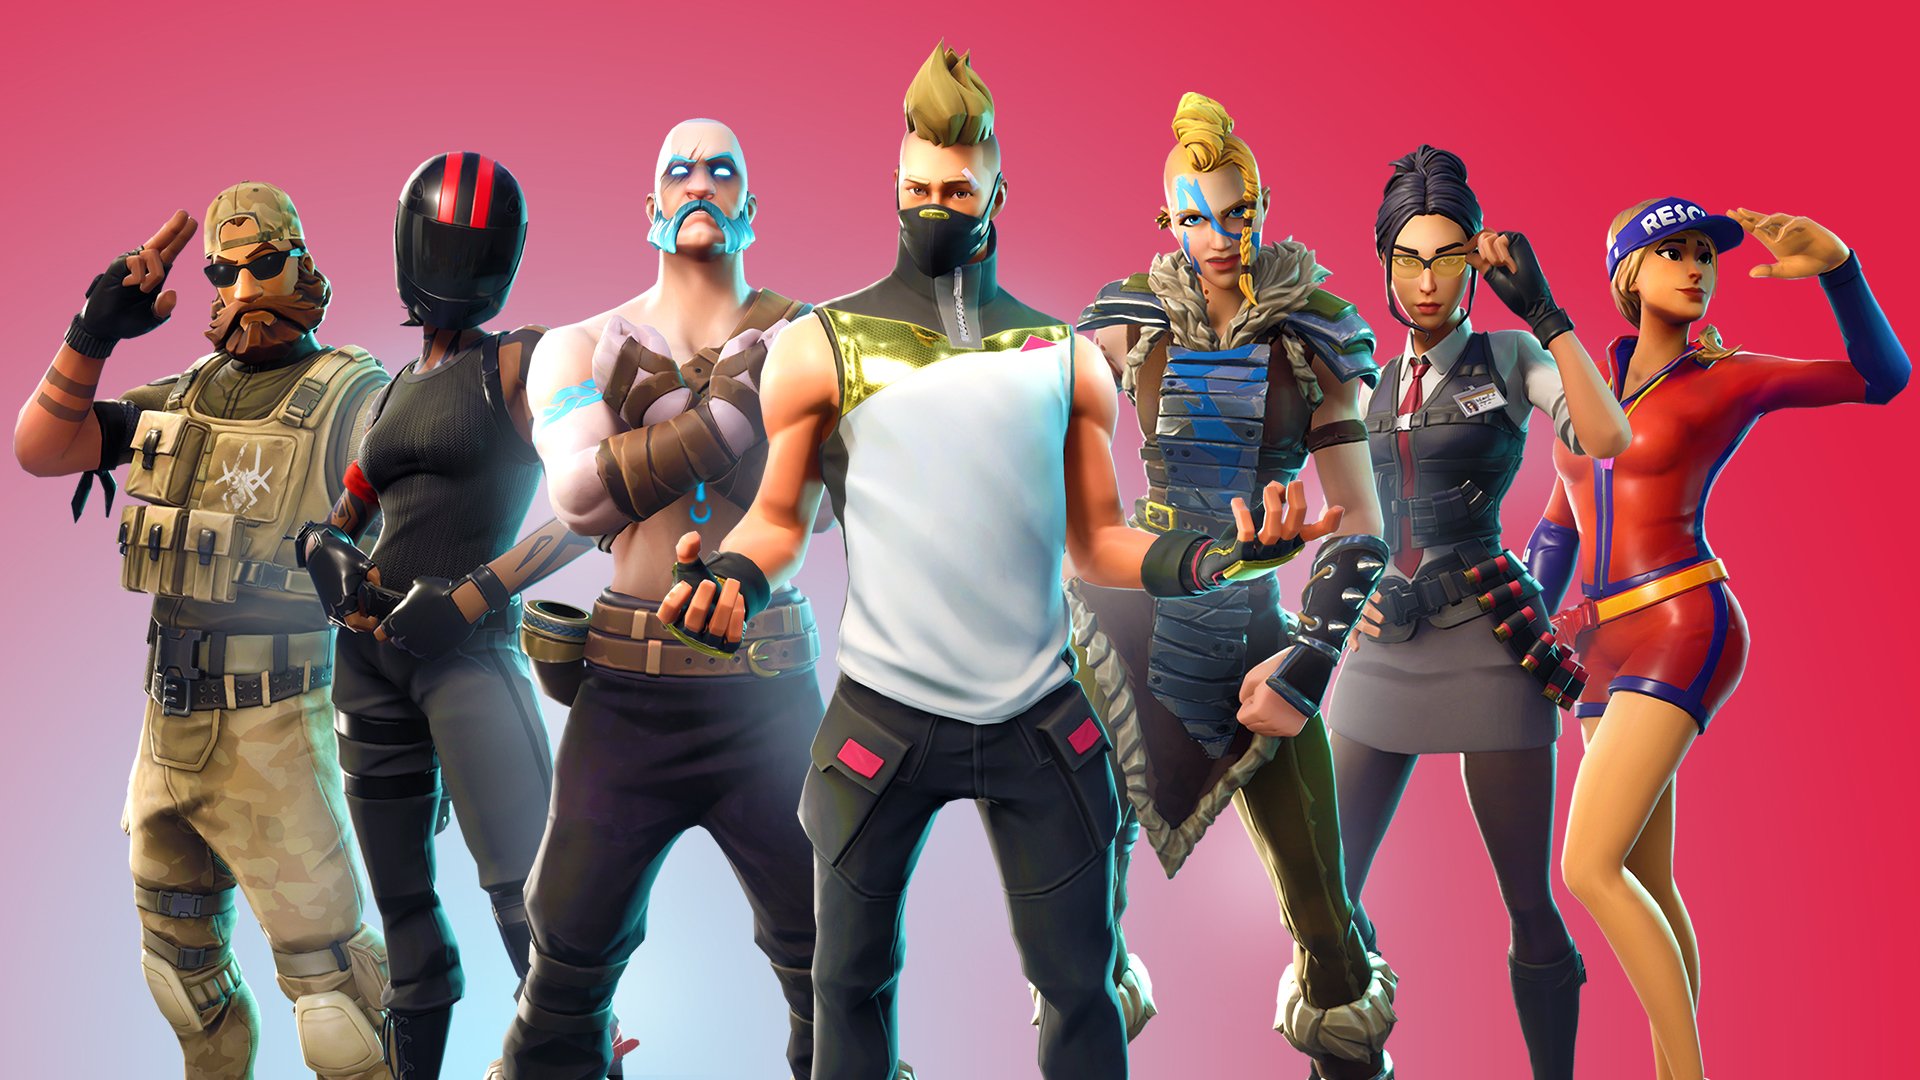 PlayStation will allow cross-play in Fortnite with Xbox ... - 1920 x 1080 jpeg 1387kB